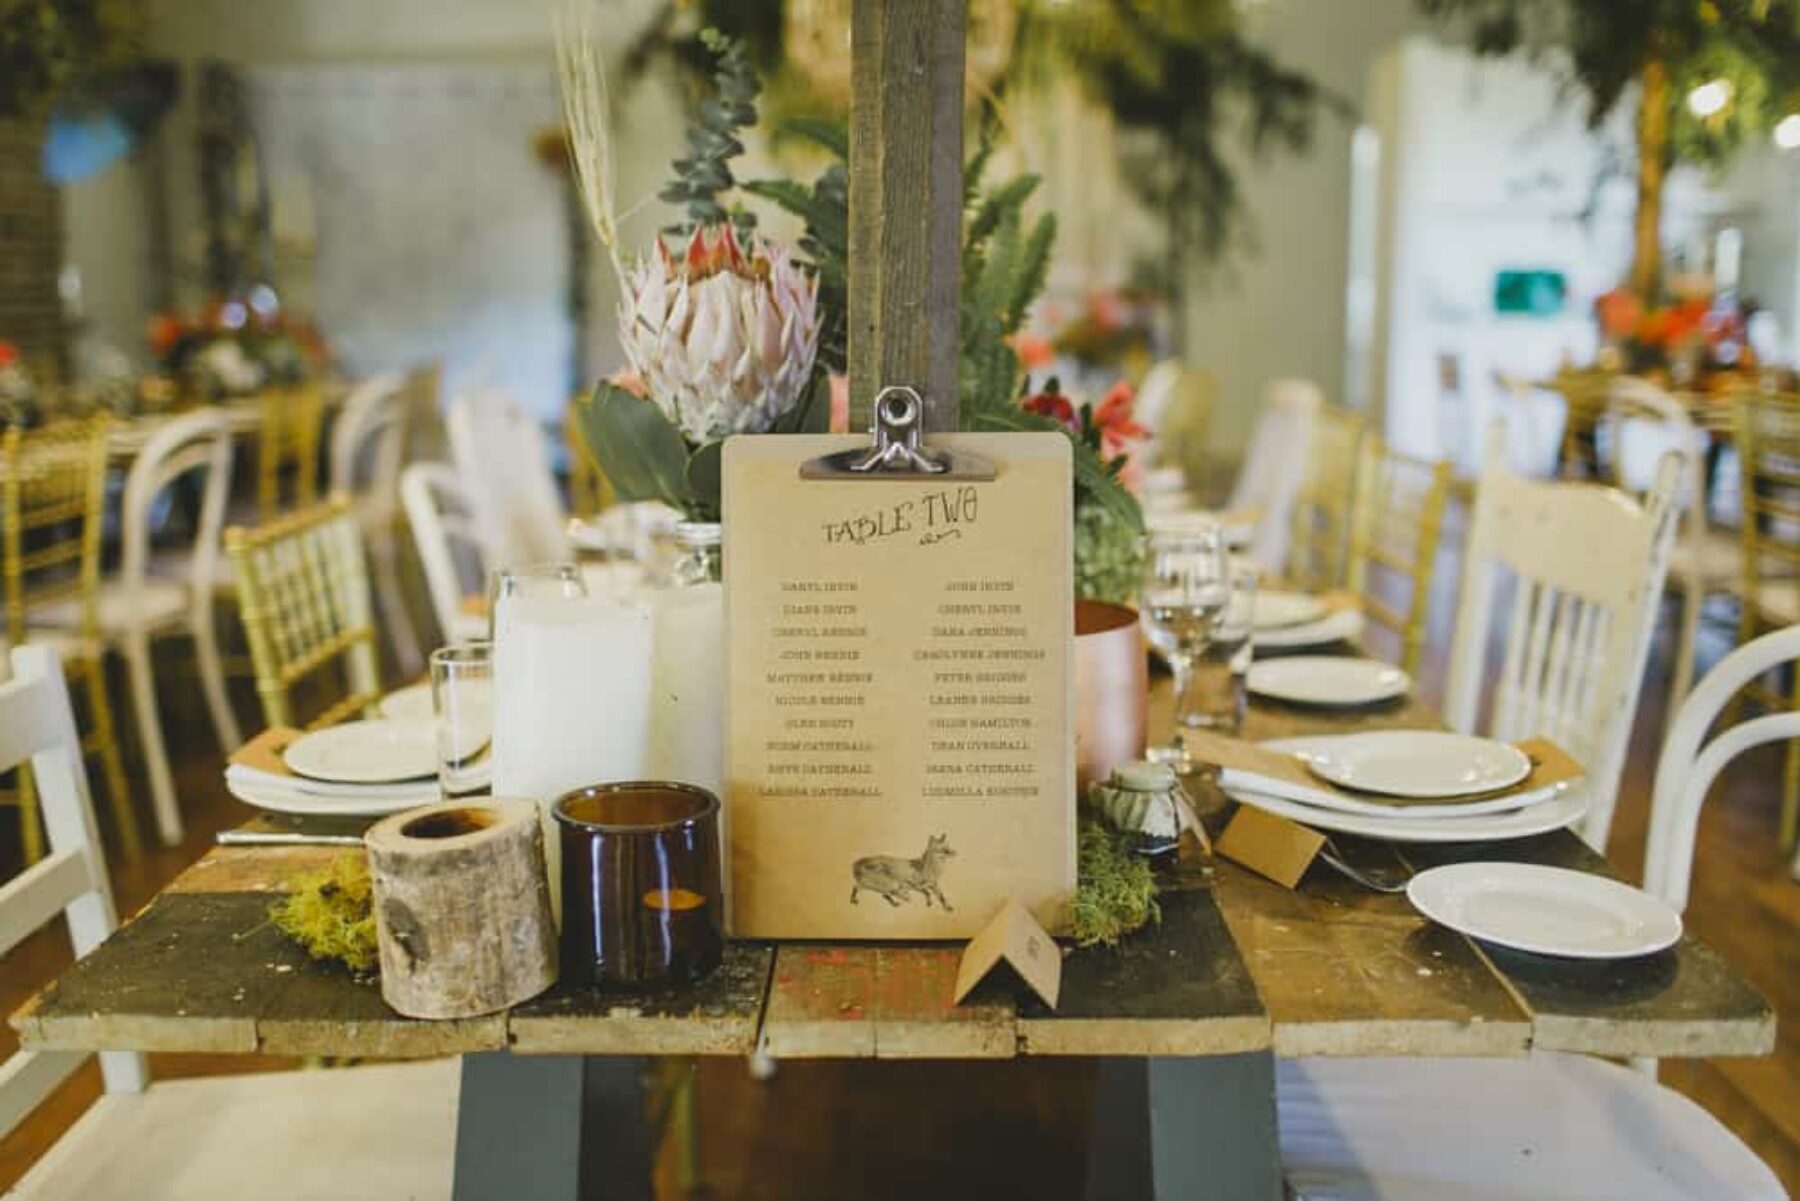 Woodland wedding at Montrose Berry Farm NSW / Nina Claire Photography / Styling by She Designs Events